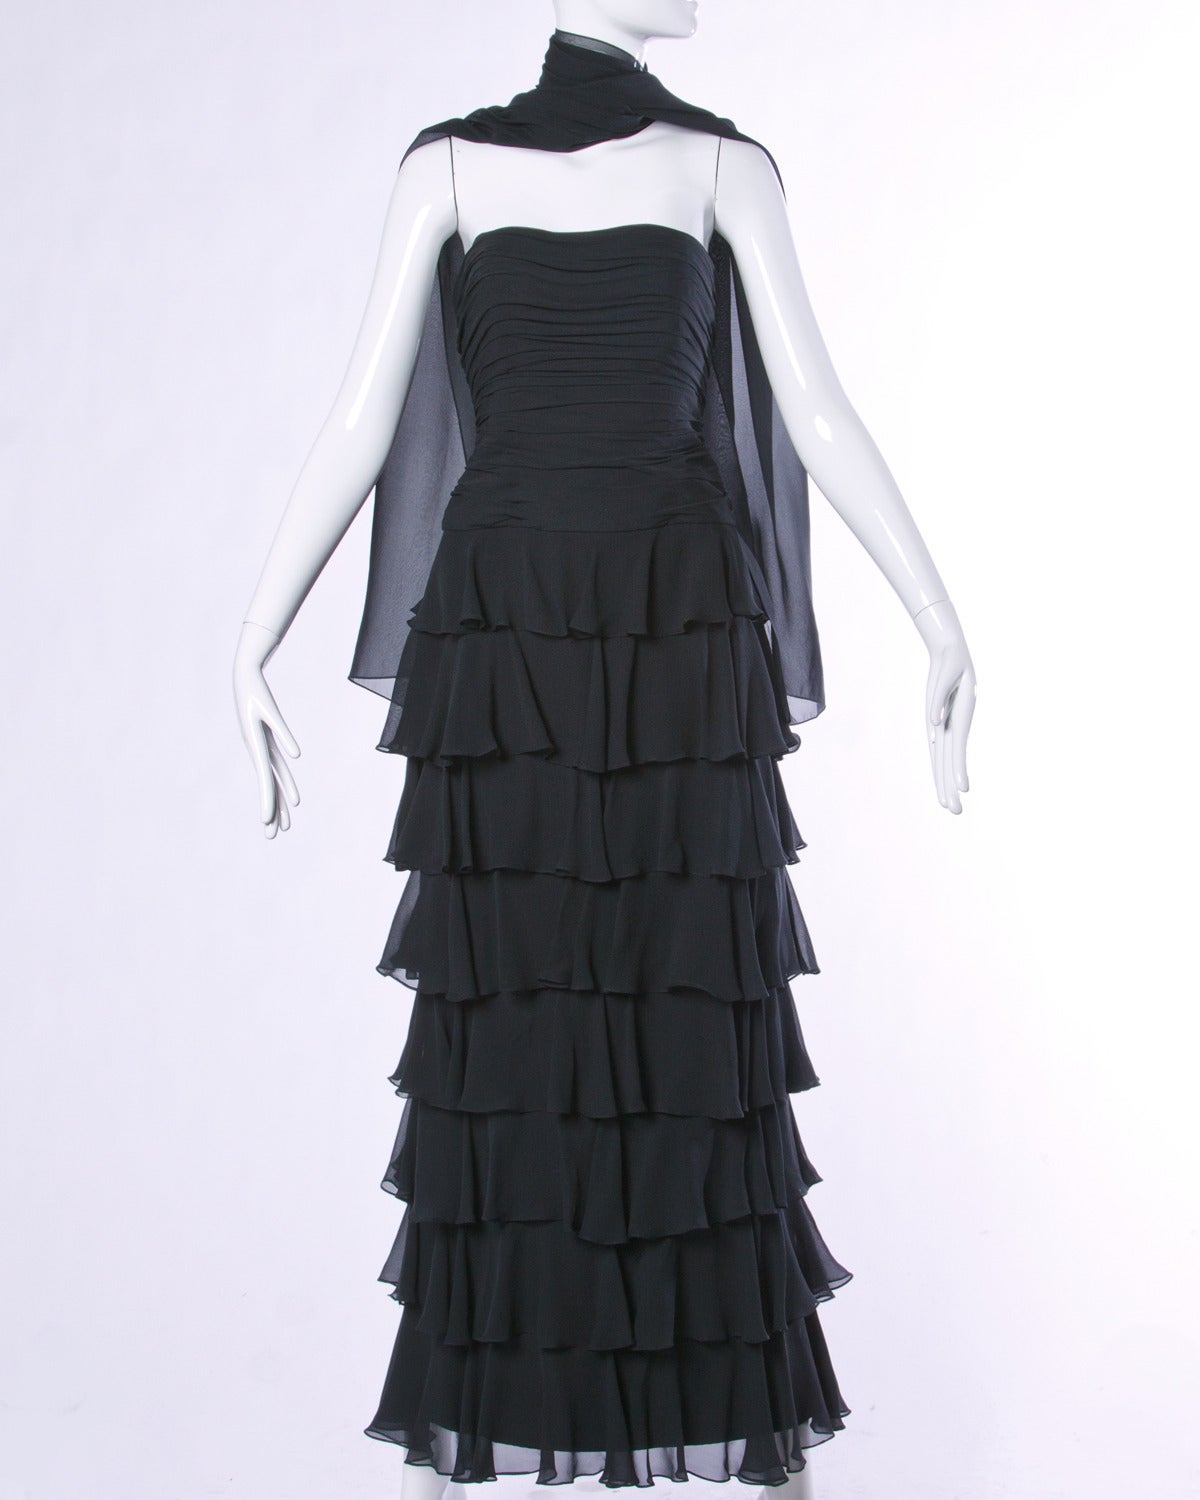 Lillie Rubin Vintage Black Tiered Silk Chiffon Strapless Evening Gown In Excellent Condition For Sale In Sparks, NV